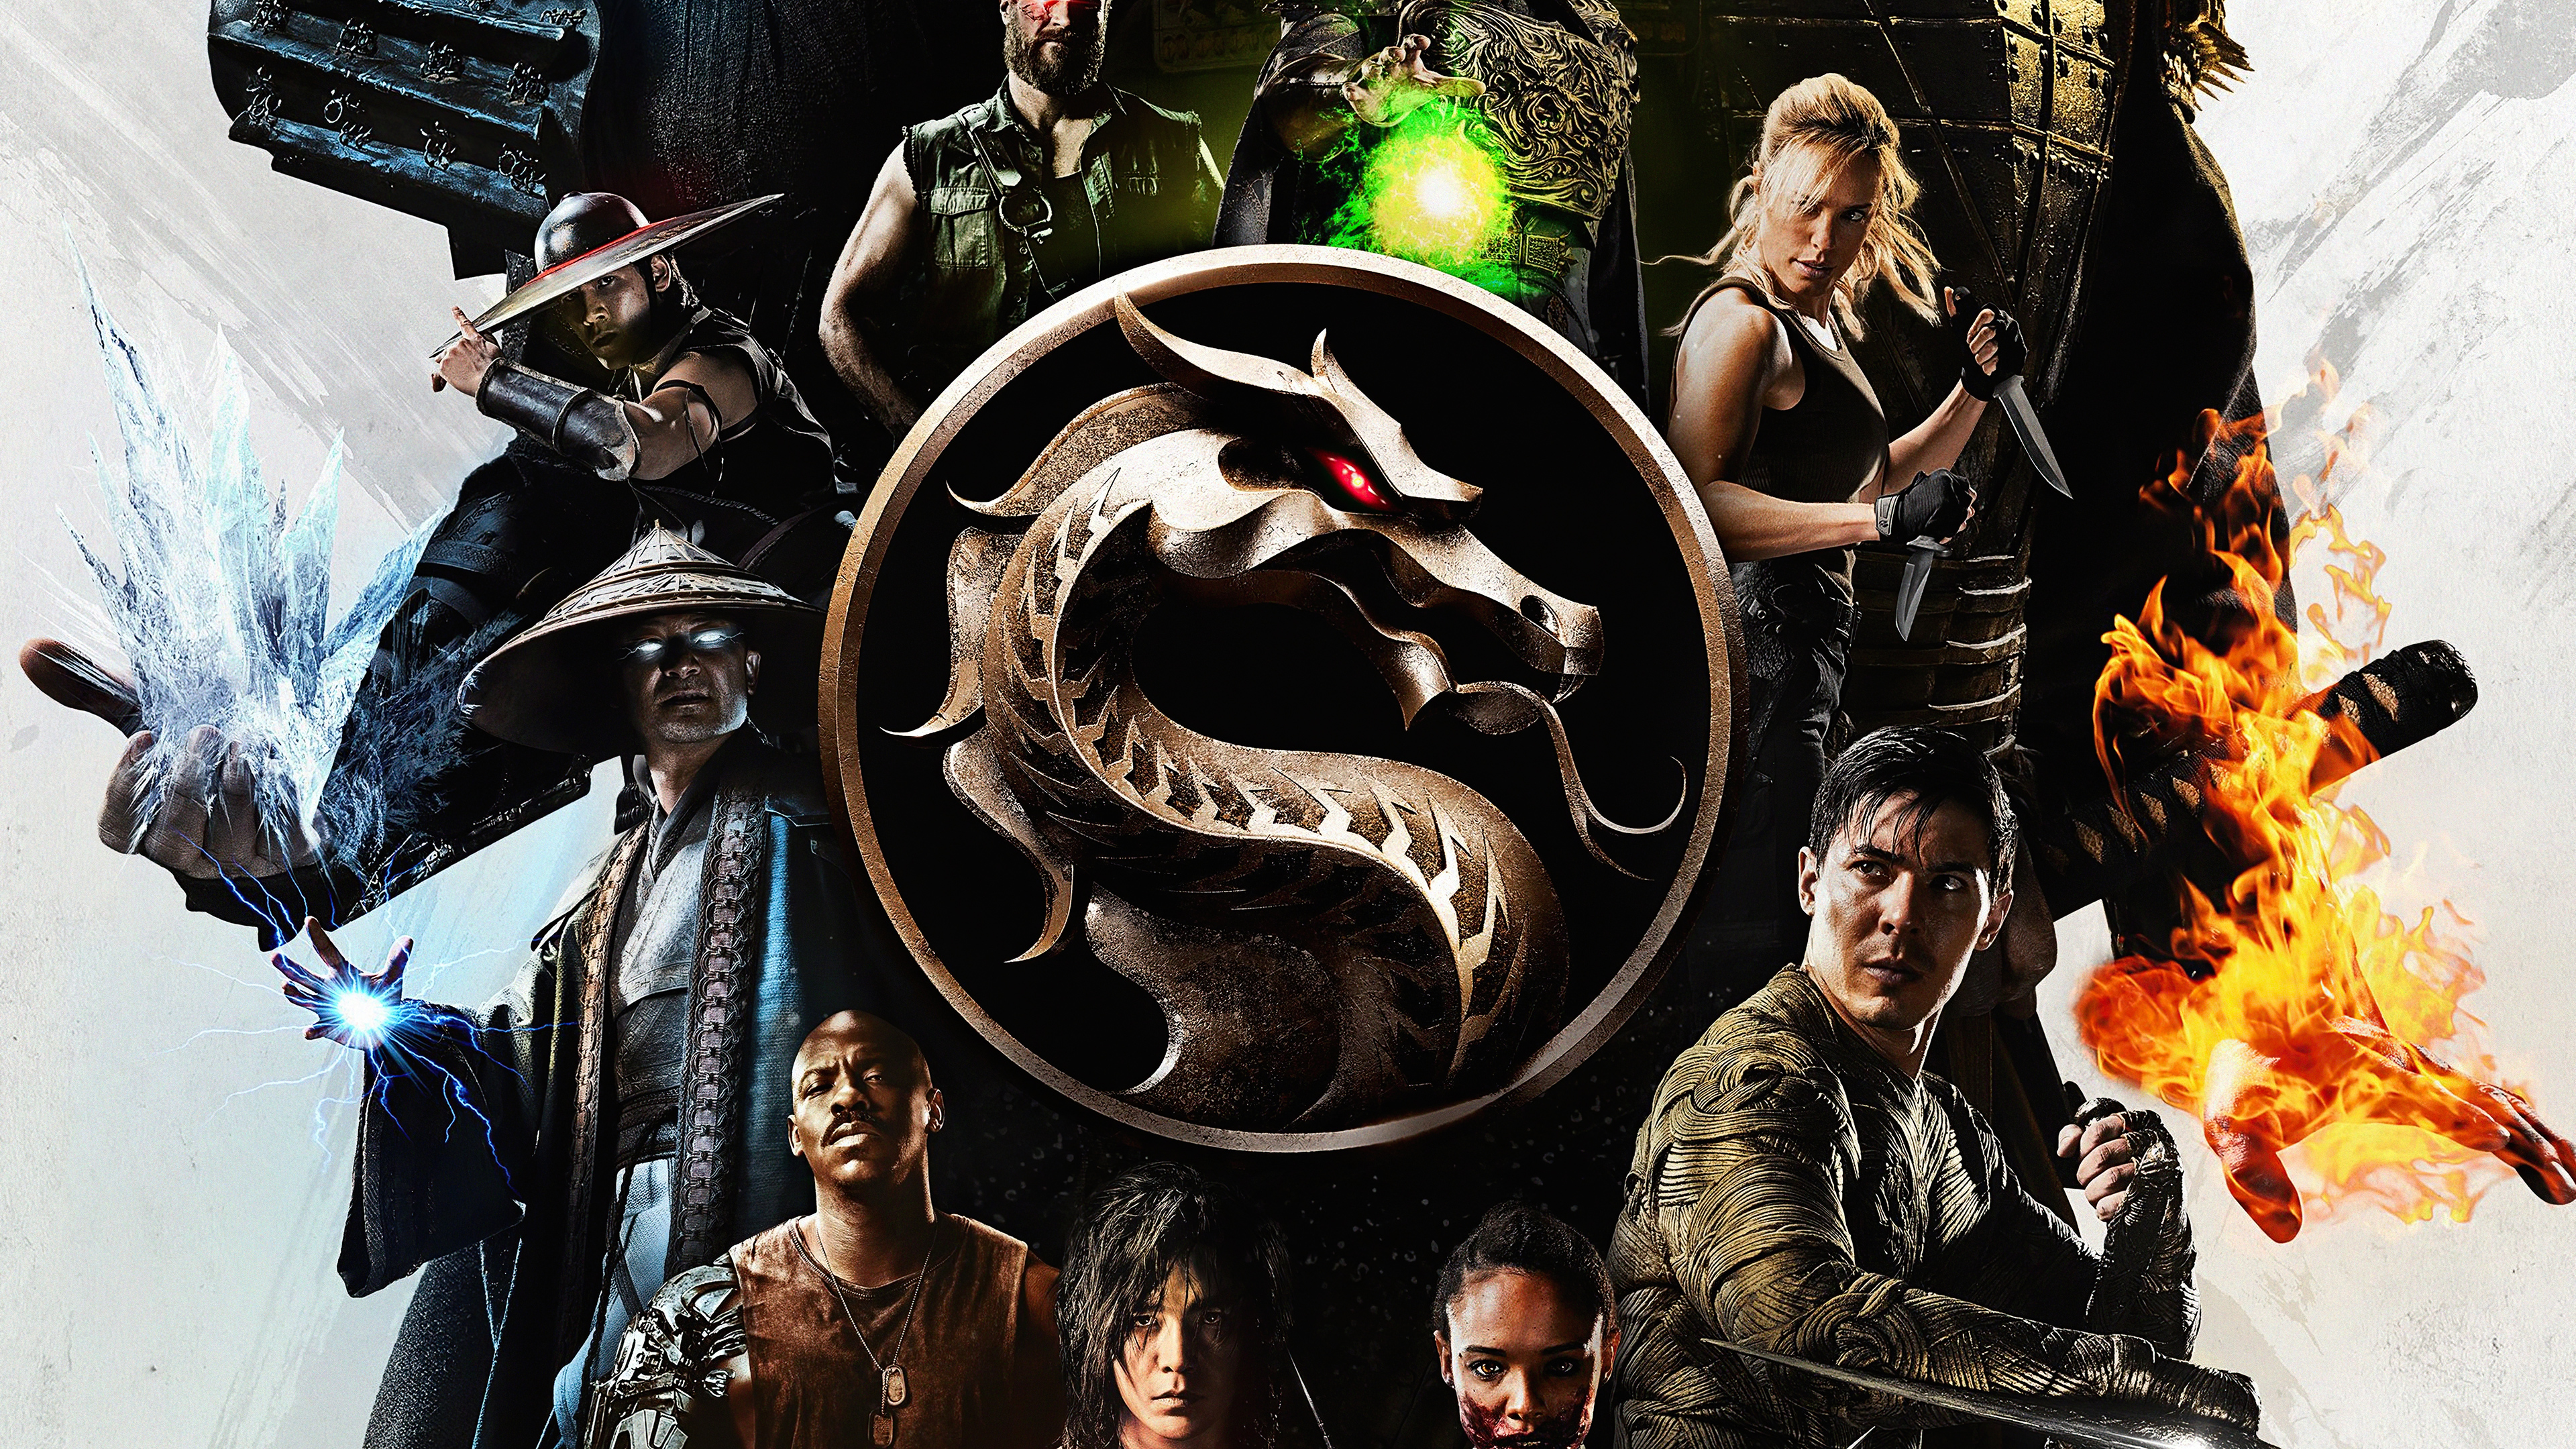 20+ Mortal Kombat (2021) HD Wallpapers and Backgrounds